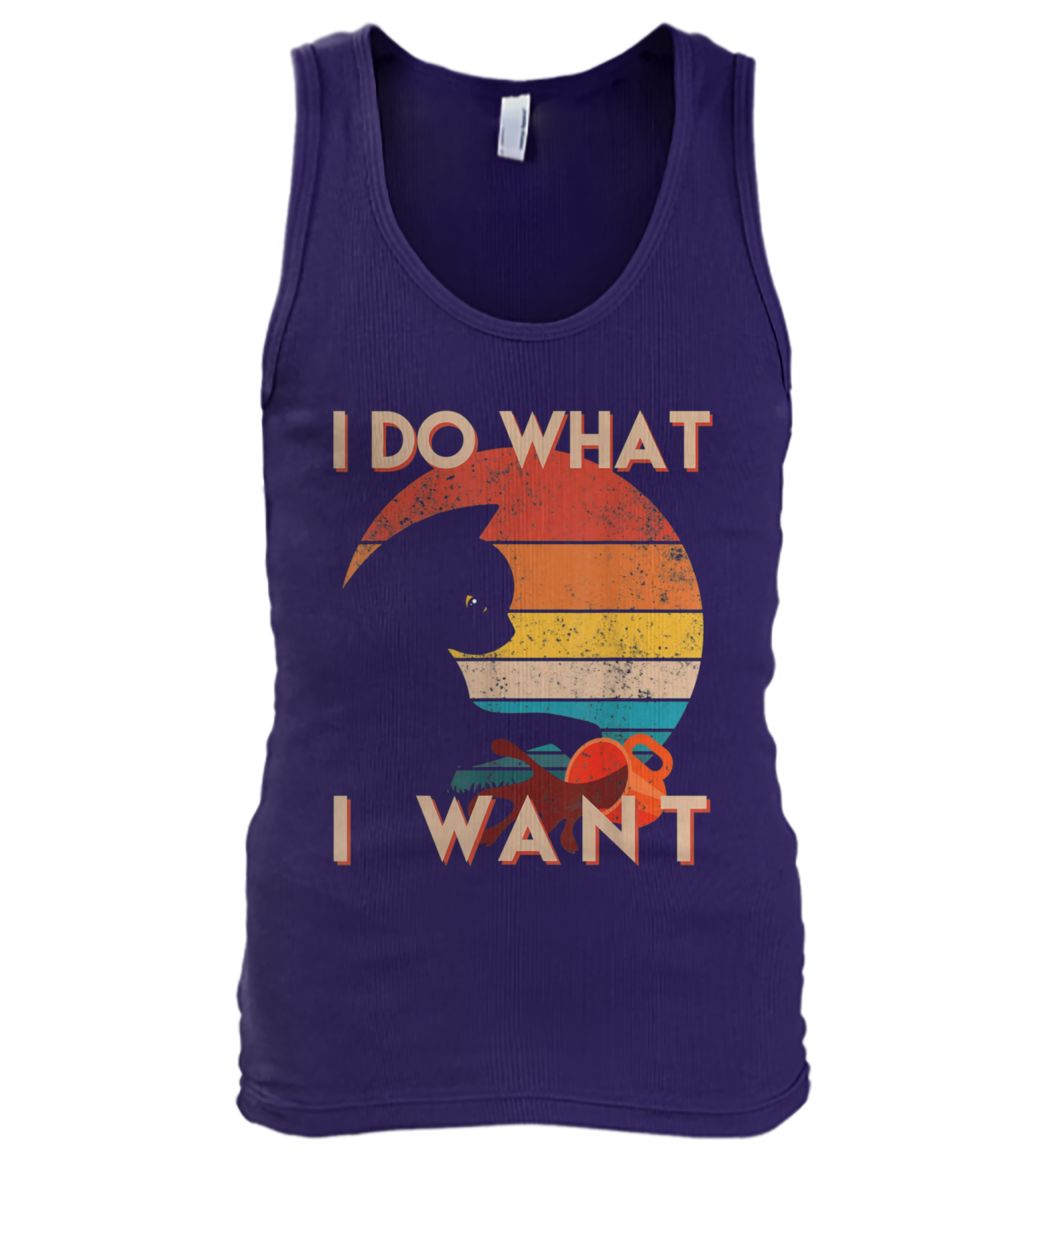 Vintage cat I do what I want men's tank top